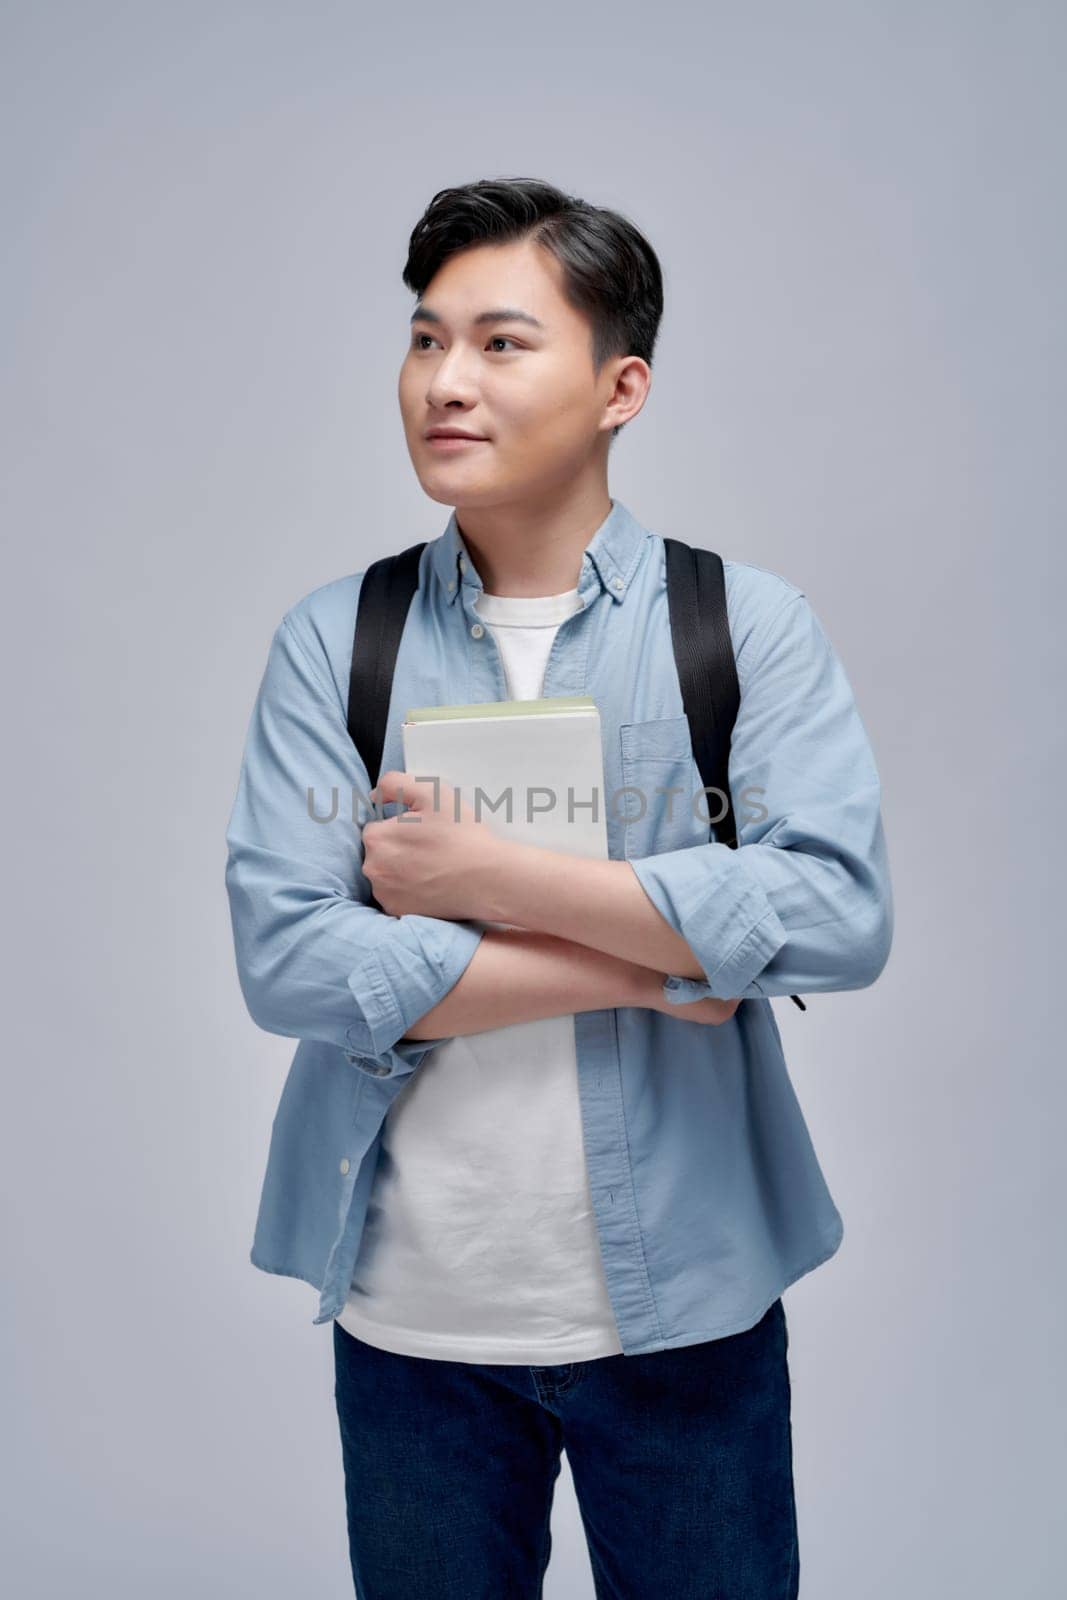 Portrait of smiling young college student with books and backpack against white background